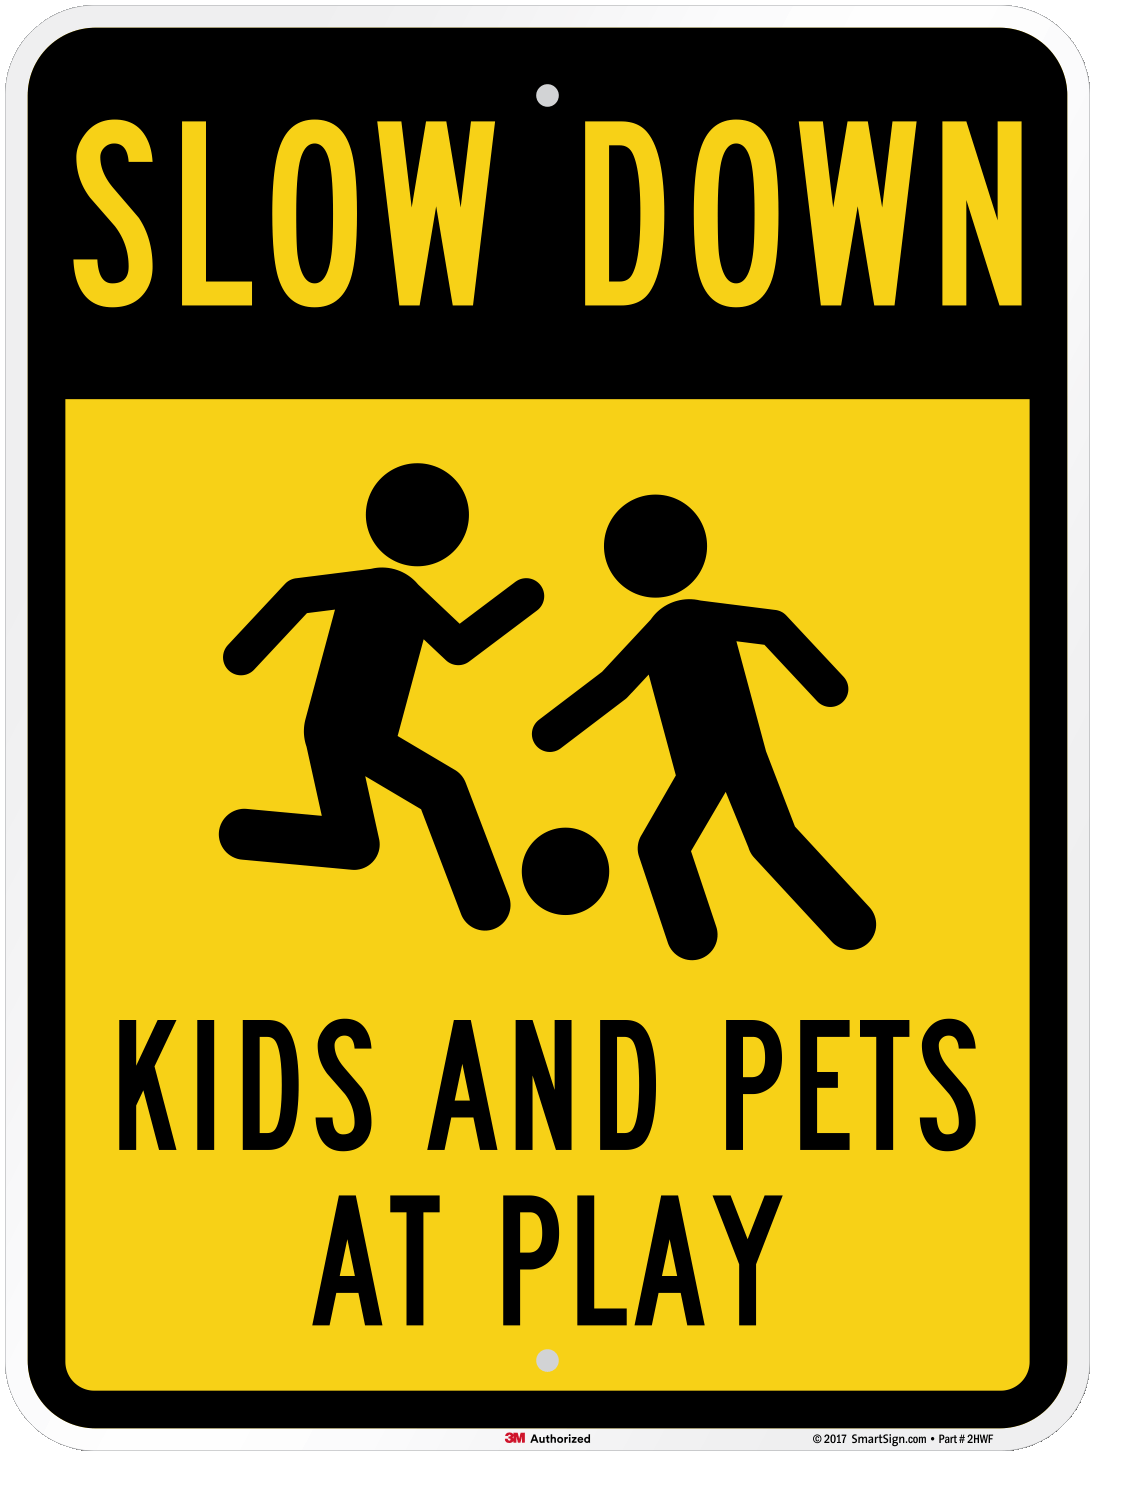 Made in USA by SIGO SIGNS SI-796 Rust Free,63 Aluminum Slow Down Sign Easy to Mount Weather Resistant Long Lasting Ink EGP 12x18 3M Reflective Children and Pets at Play Sign 